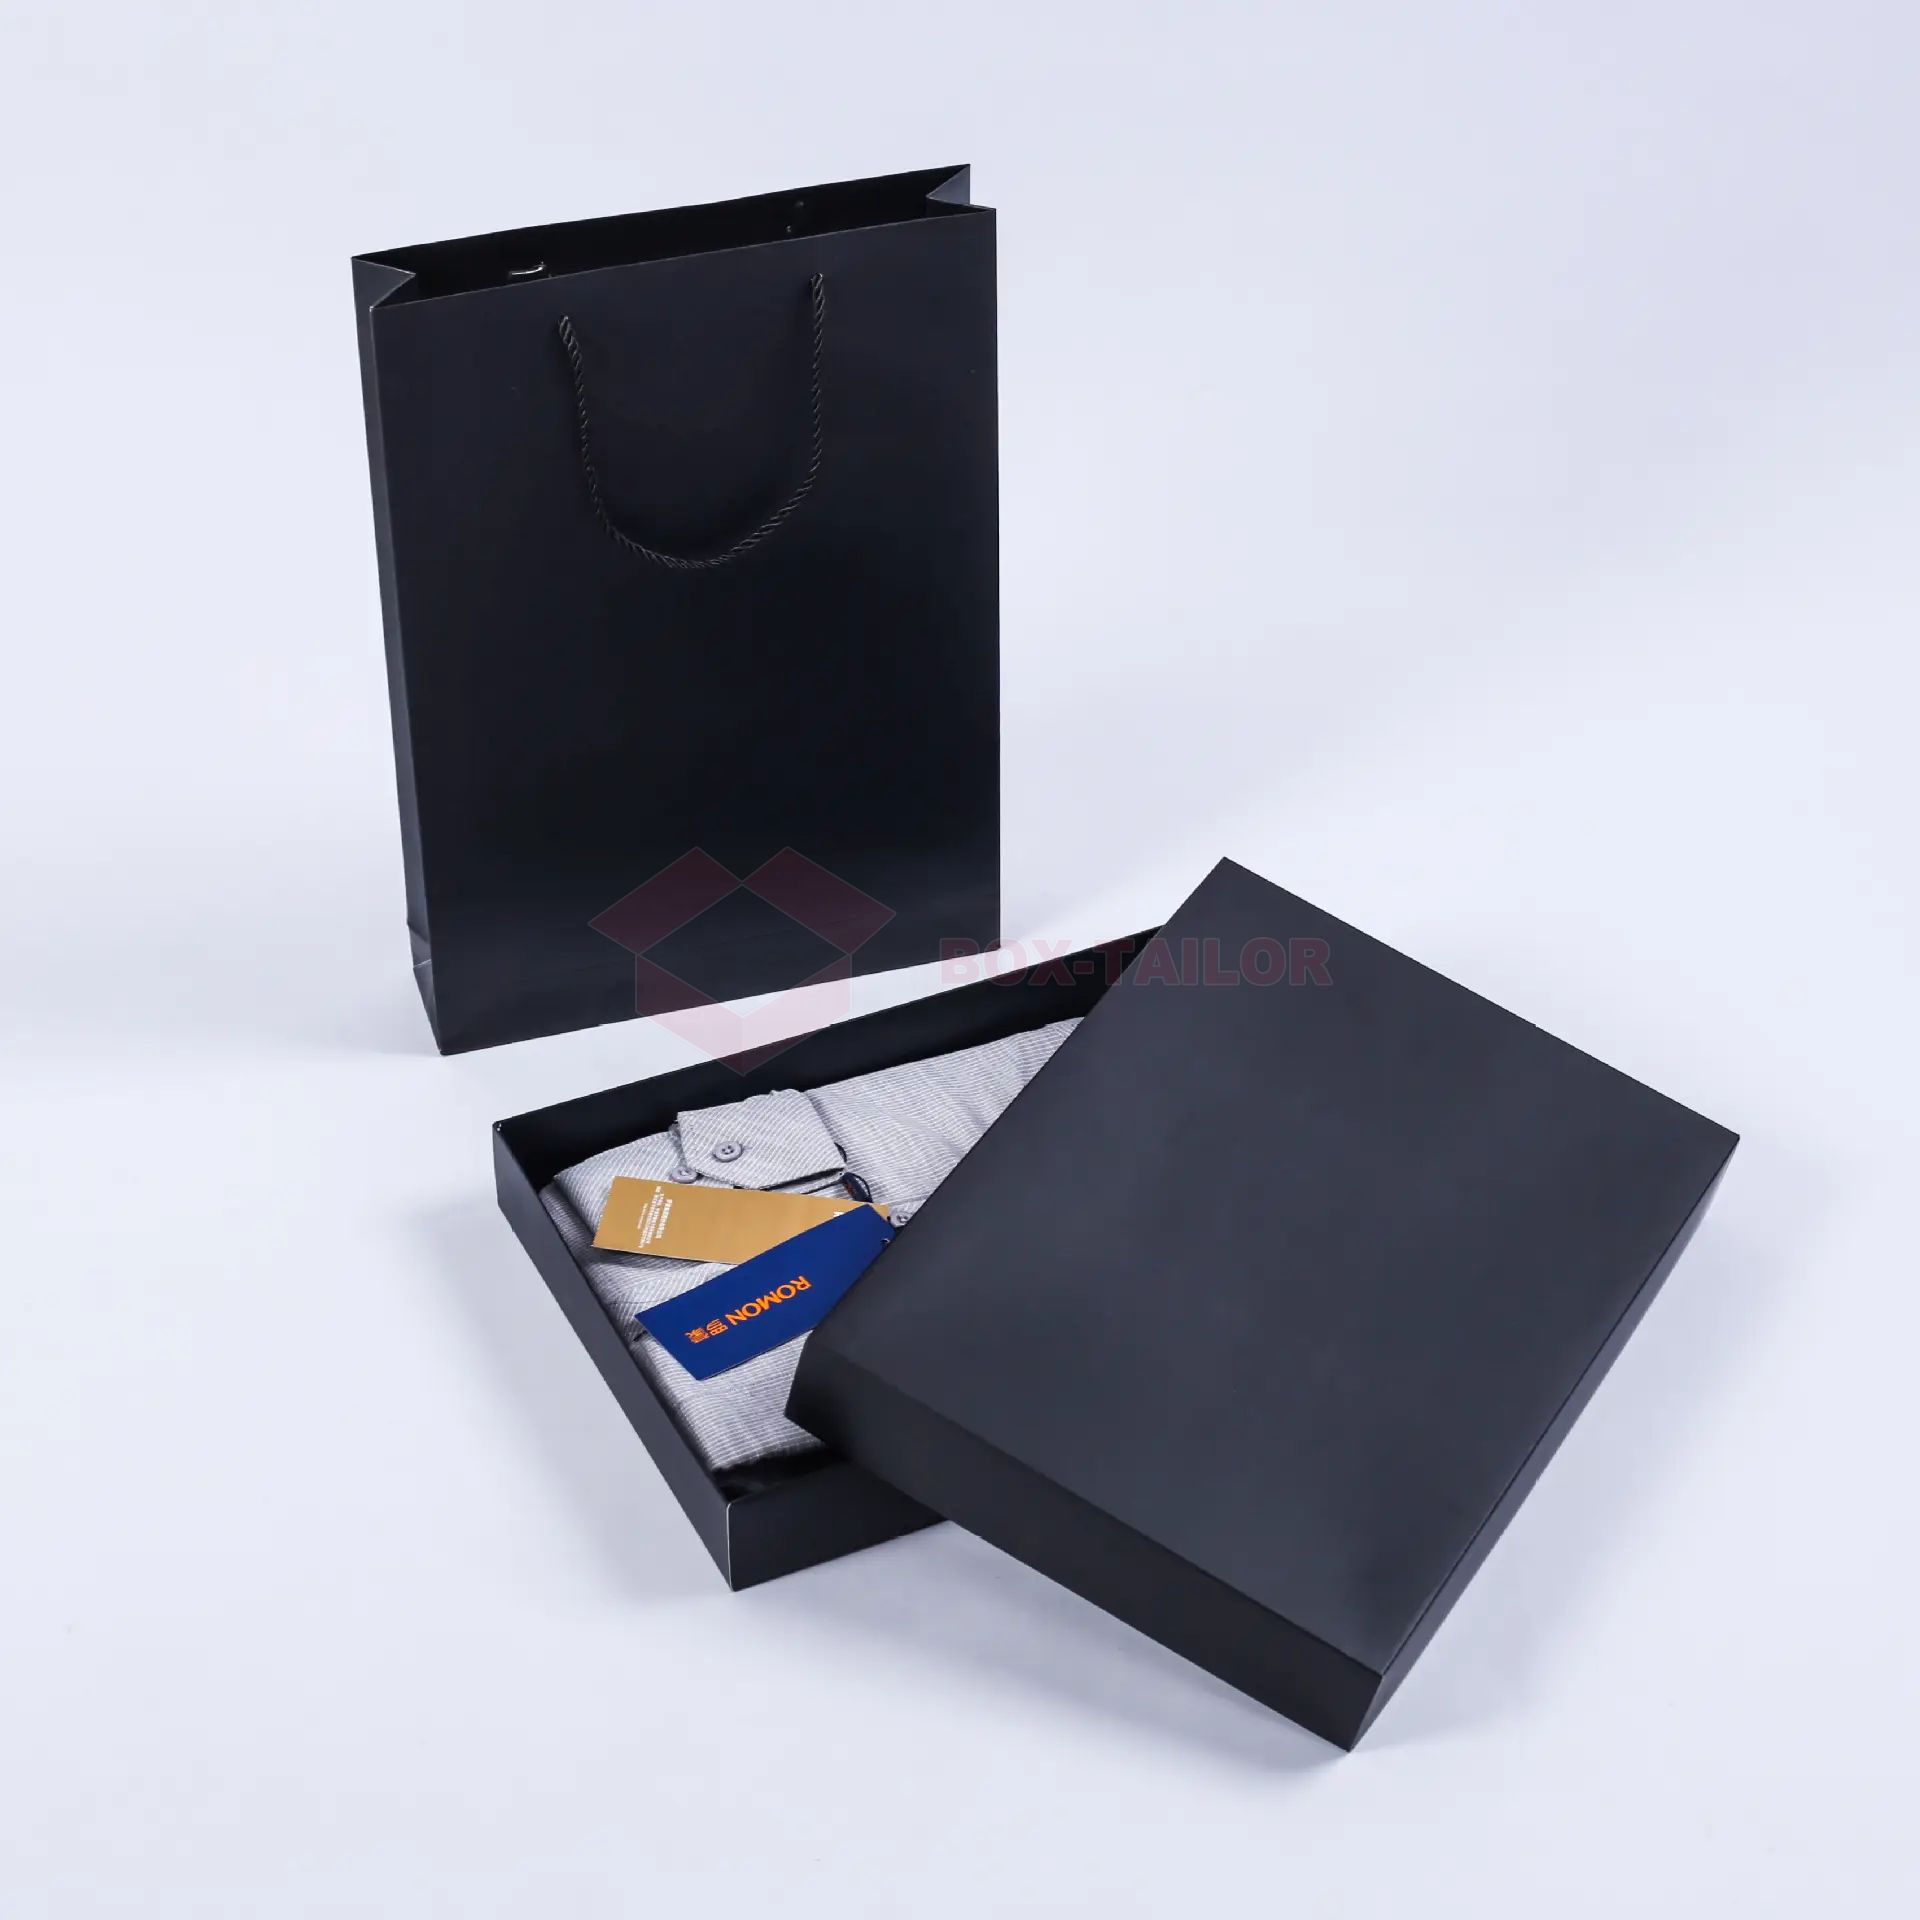 Customized Clothing Packaging Boxes, Clothing Box Design